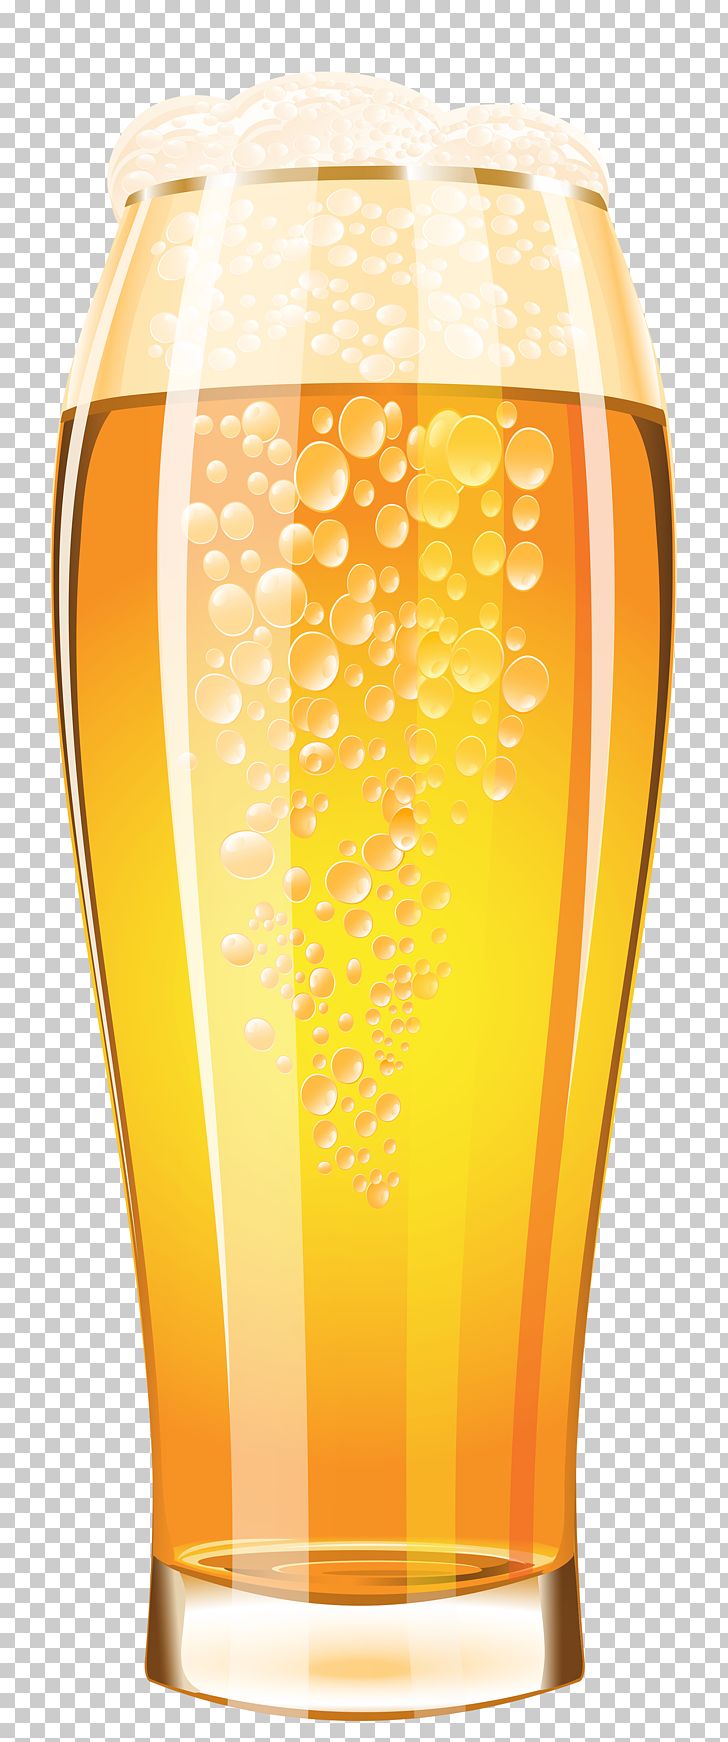 Beer Glassware Cocktail PNG, Clipart, Alcoholic Drink, Art Glass, Beer, Beer Bottle, Beer Cocktail Free PNG Download